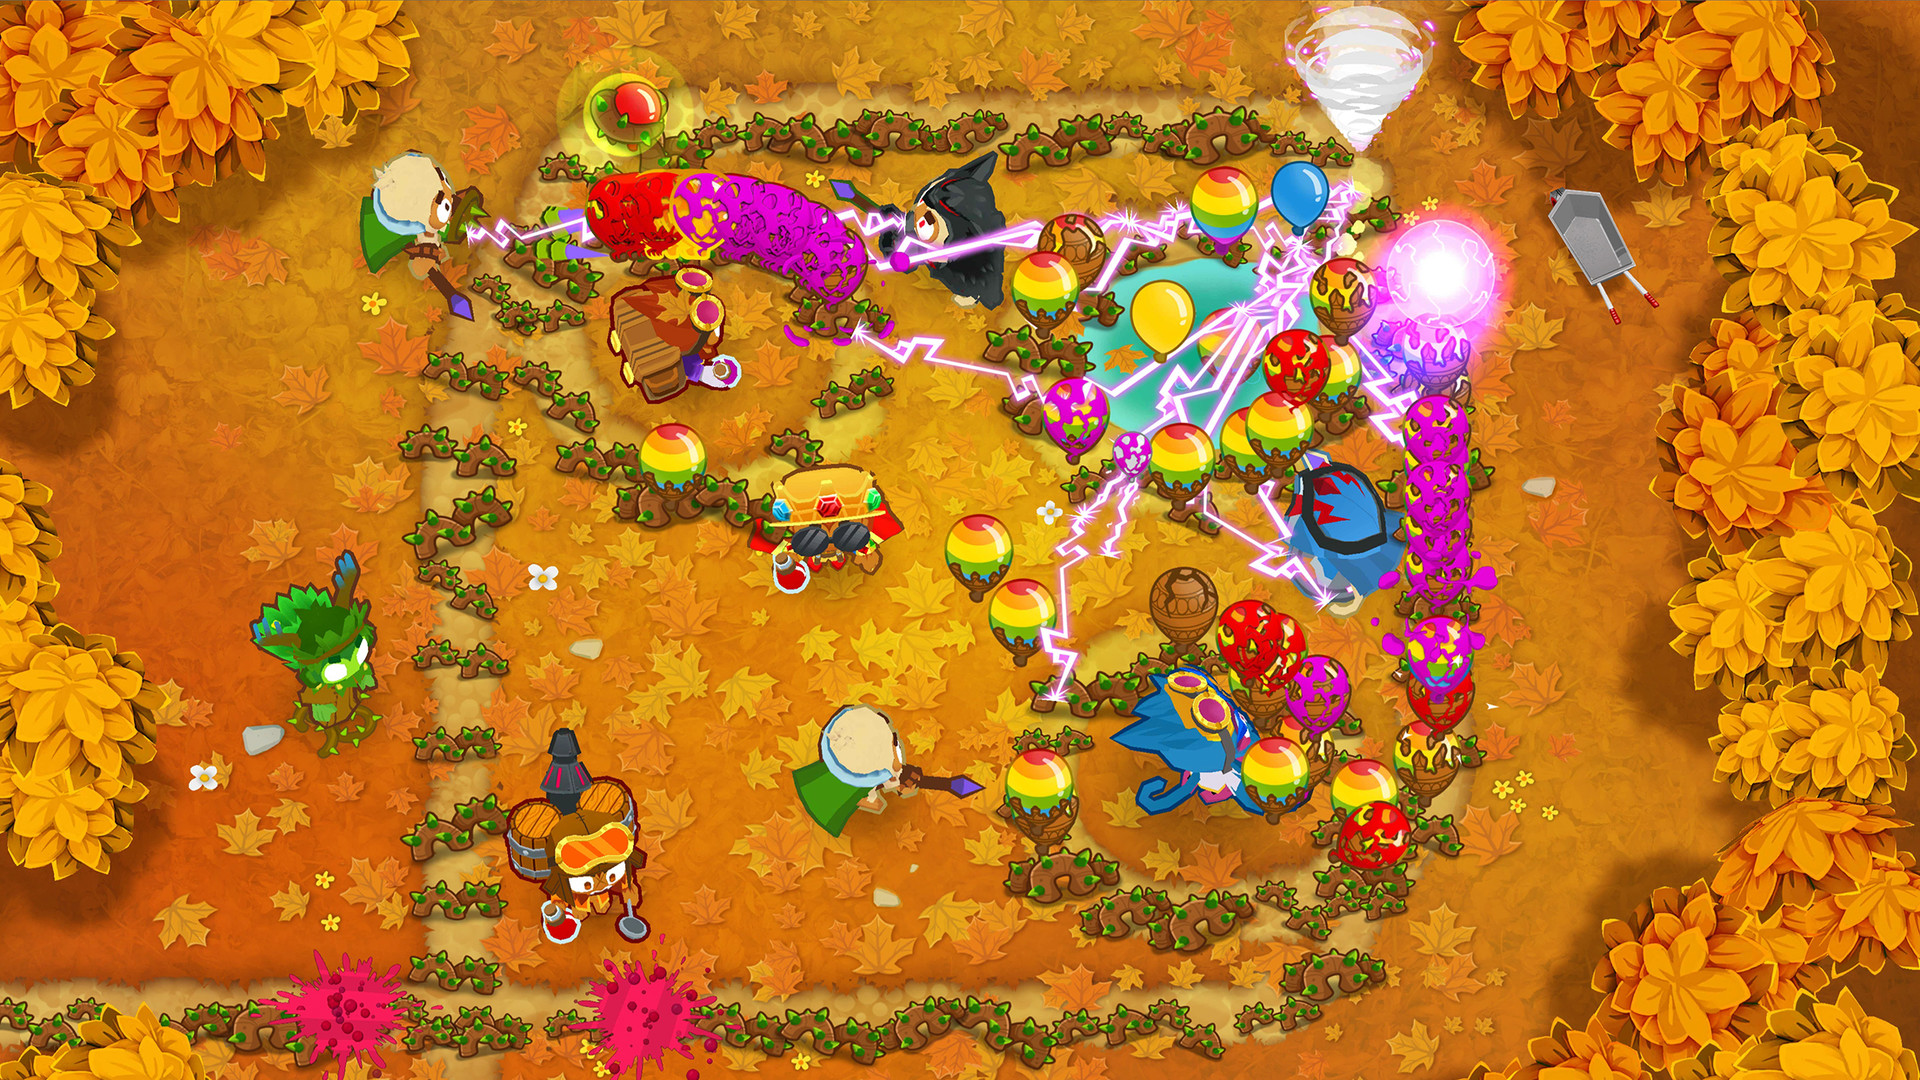 bloon tower defense 5 free